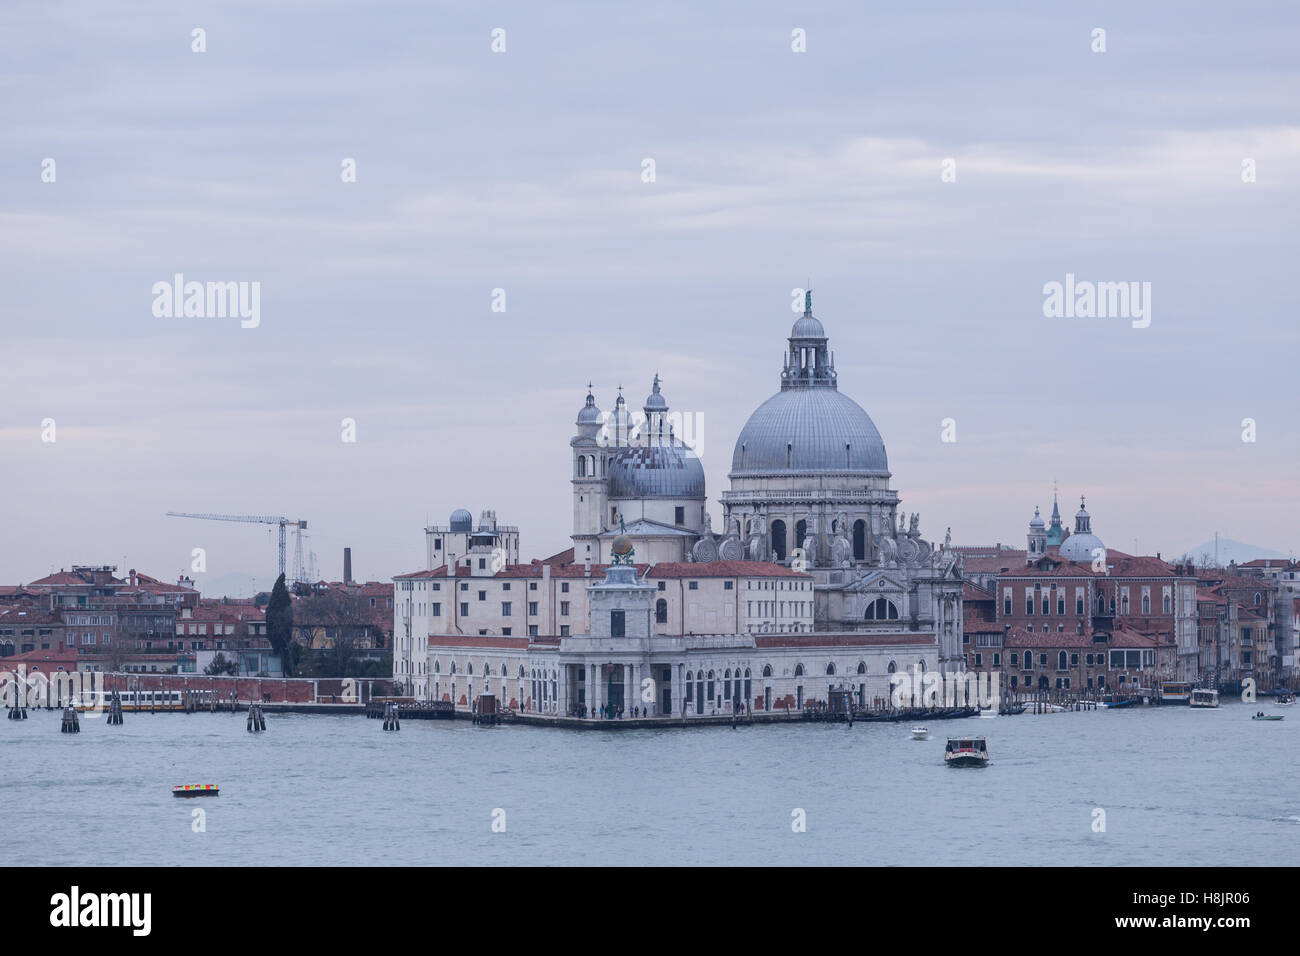 Basilica Santa Maria della Salute in Venice, Italy. It dates from around 1631 and finished in 1687. Stock Photo